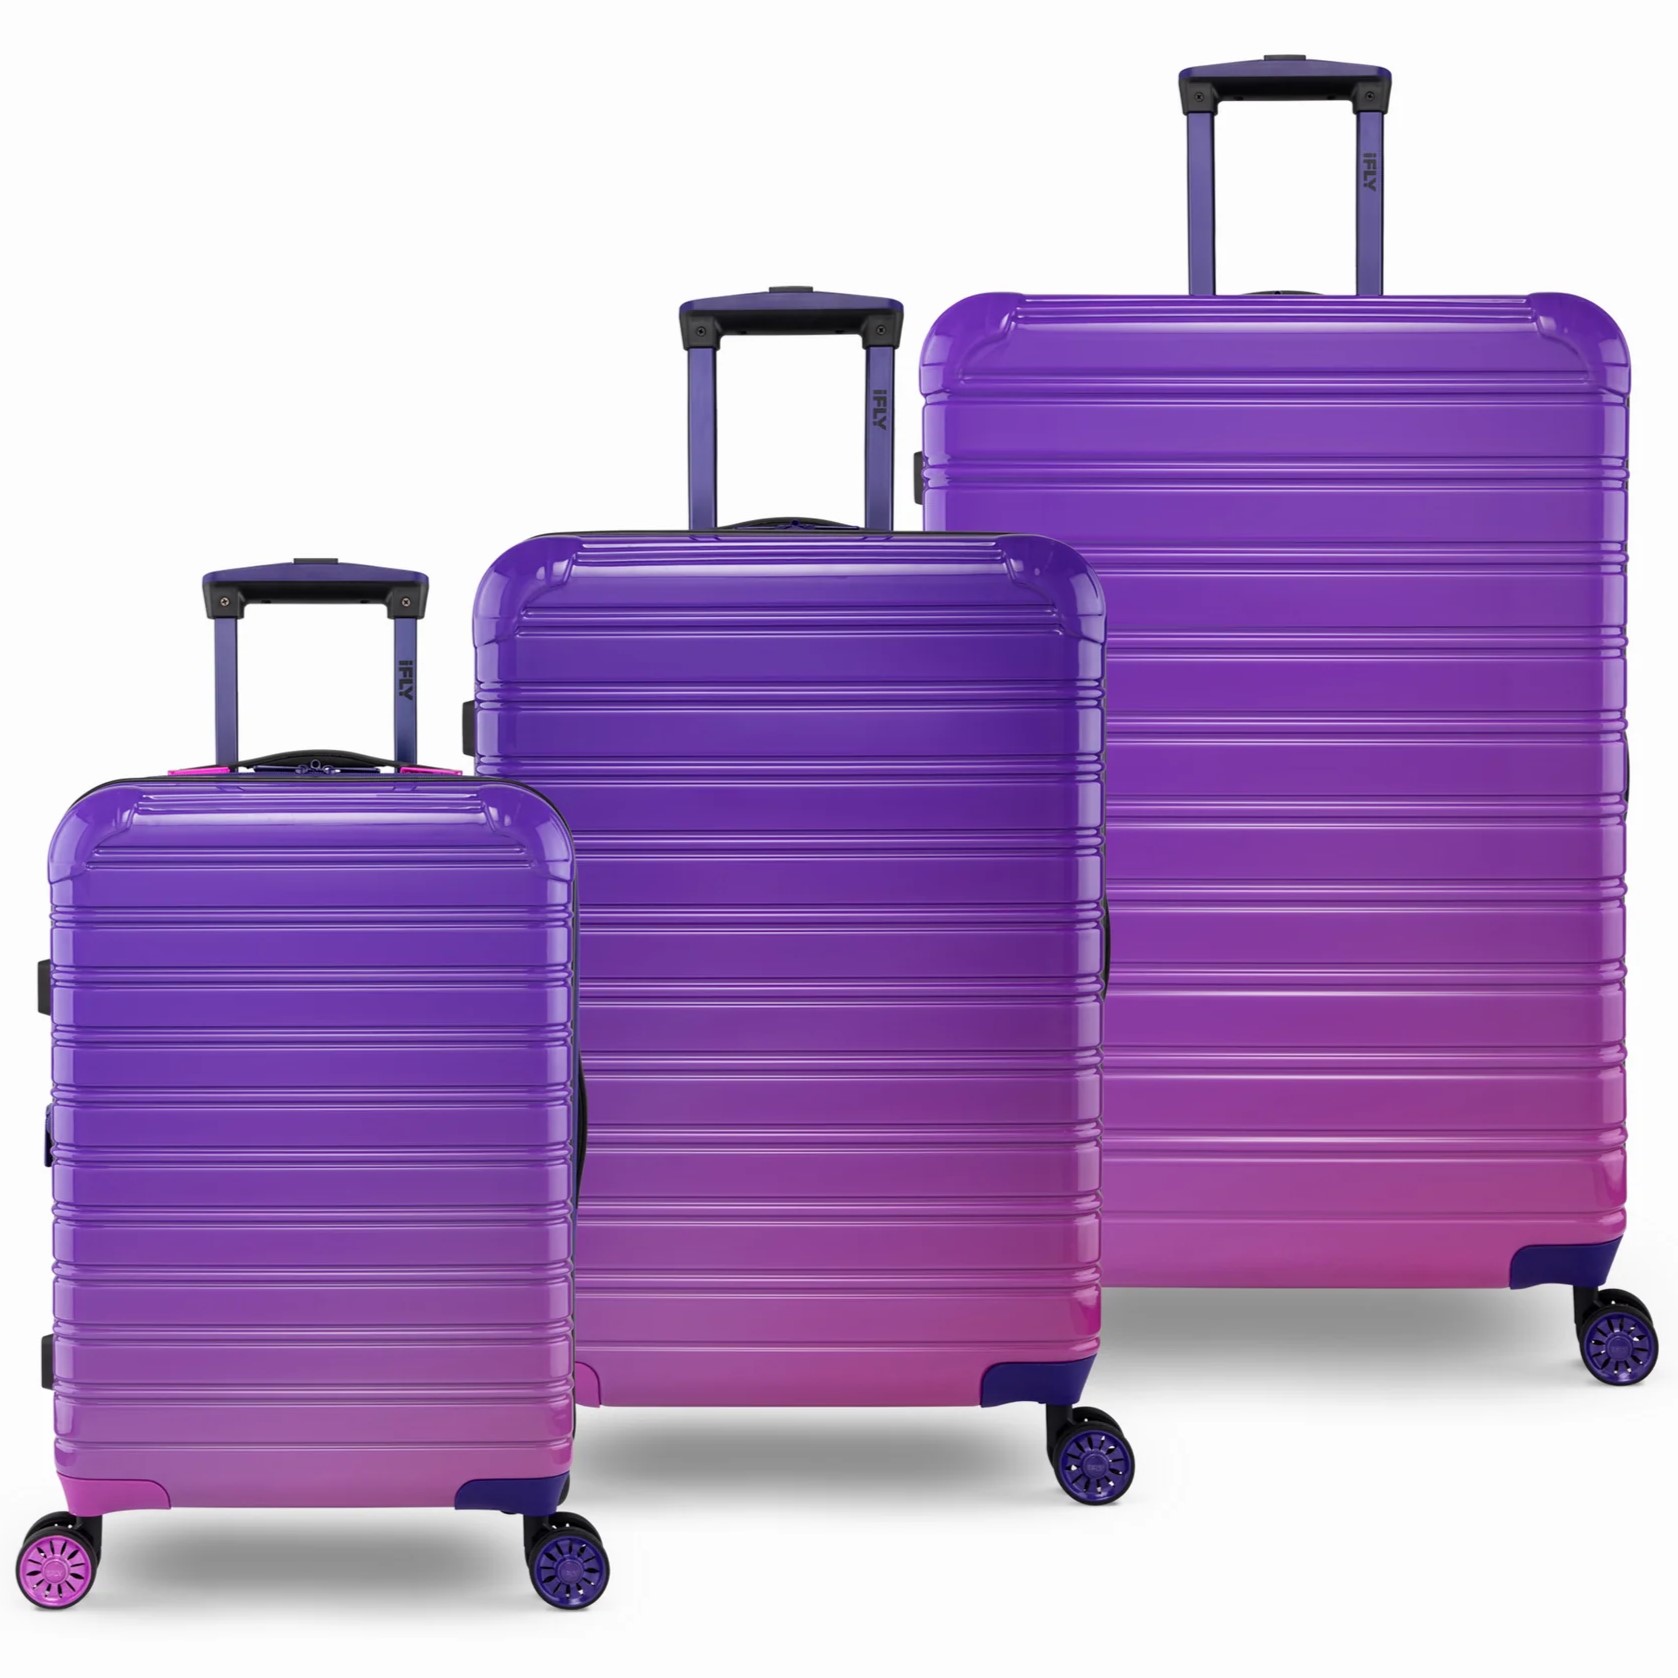 VALI MÀU TÍM LOANG DU LỊCH IFLY FIBERTECH OMBRE HARDSIDE LUGGAGE IN MIDNIGHT BERRY 11